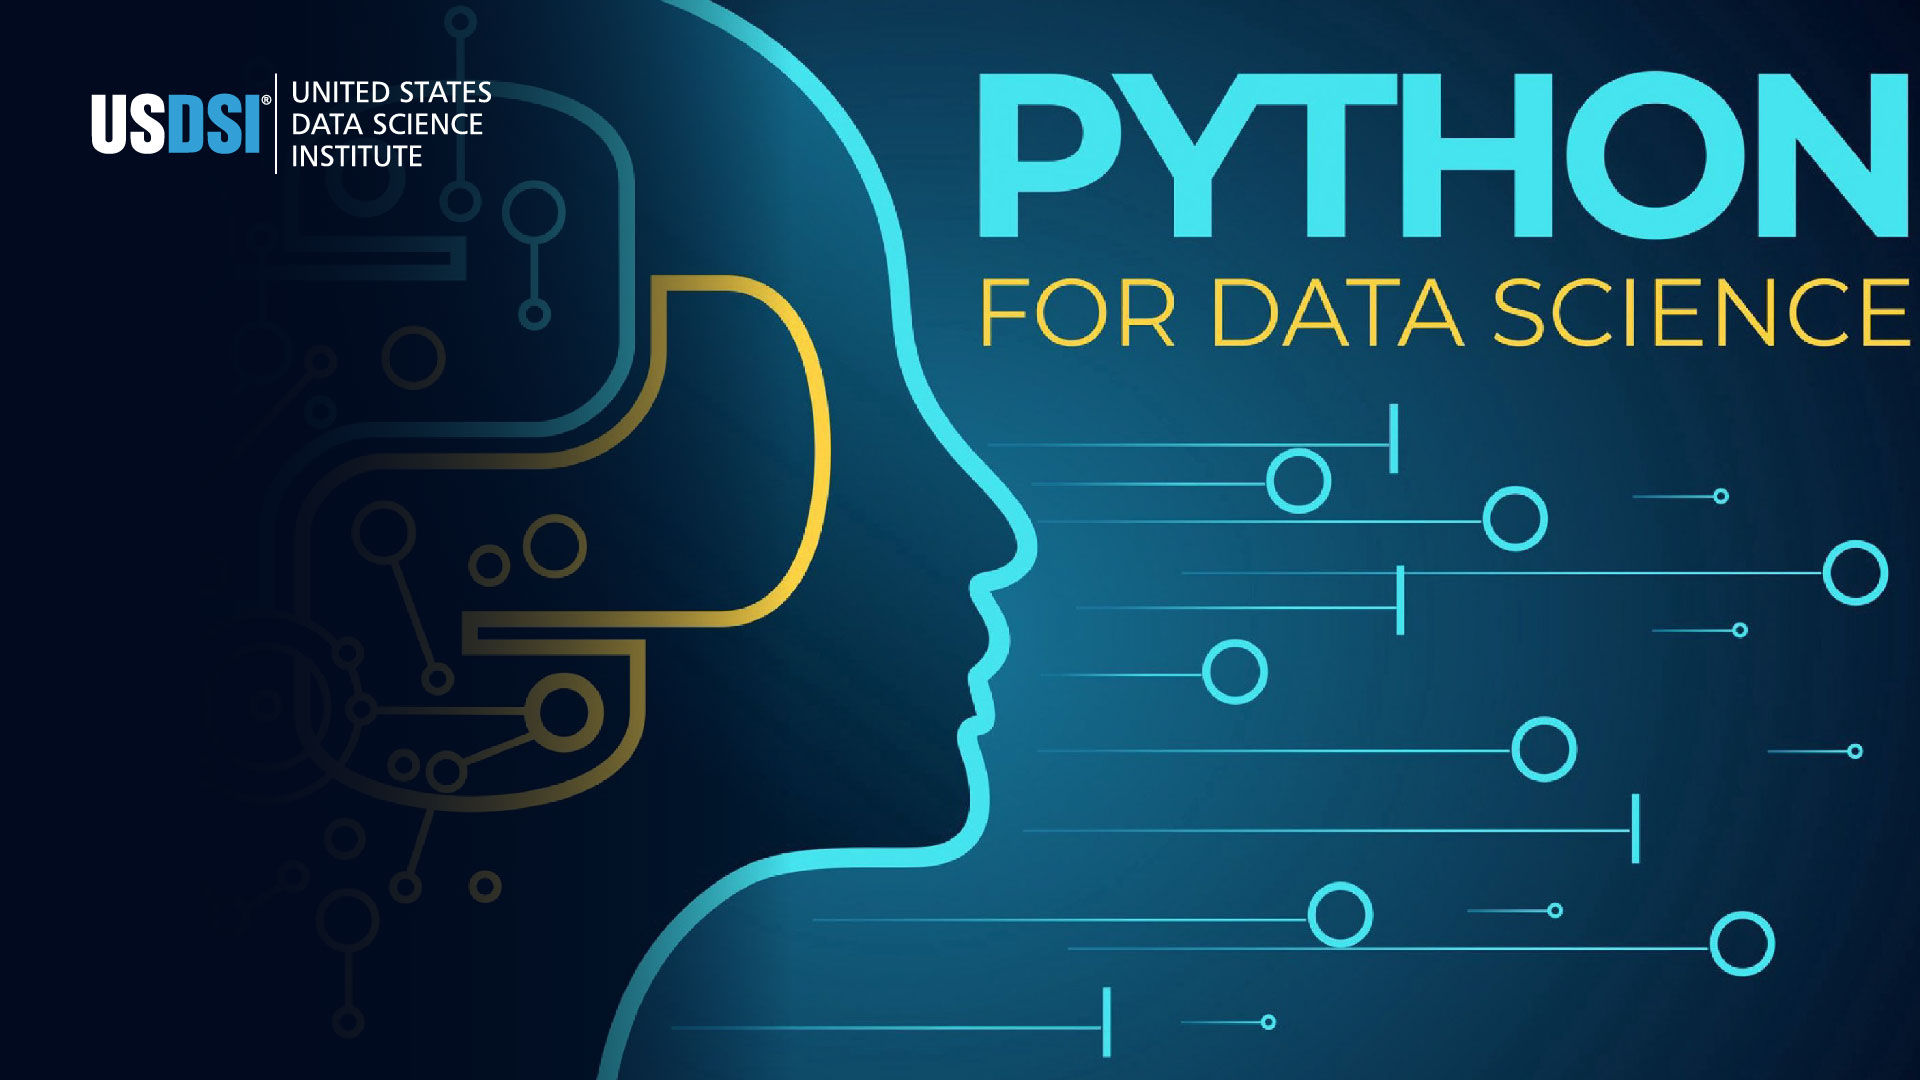 Python for Data Science - Explained in 6 Easy Steps